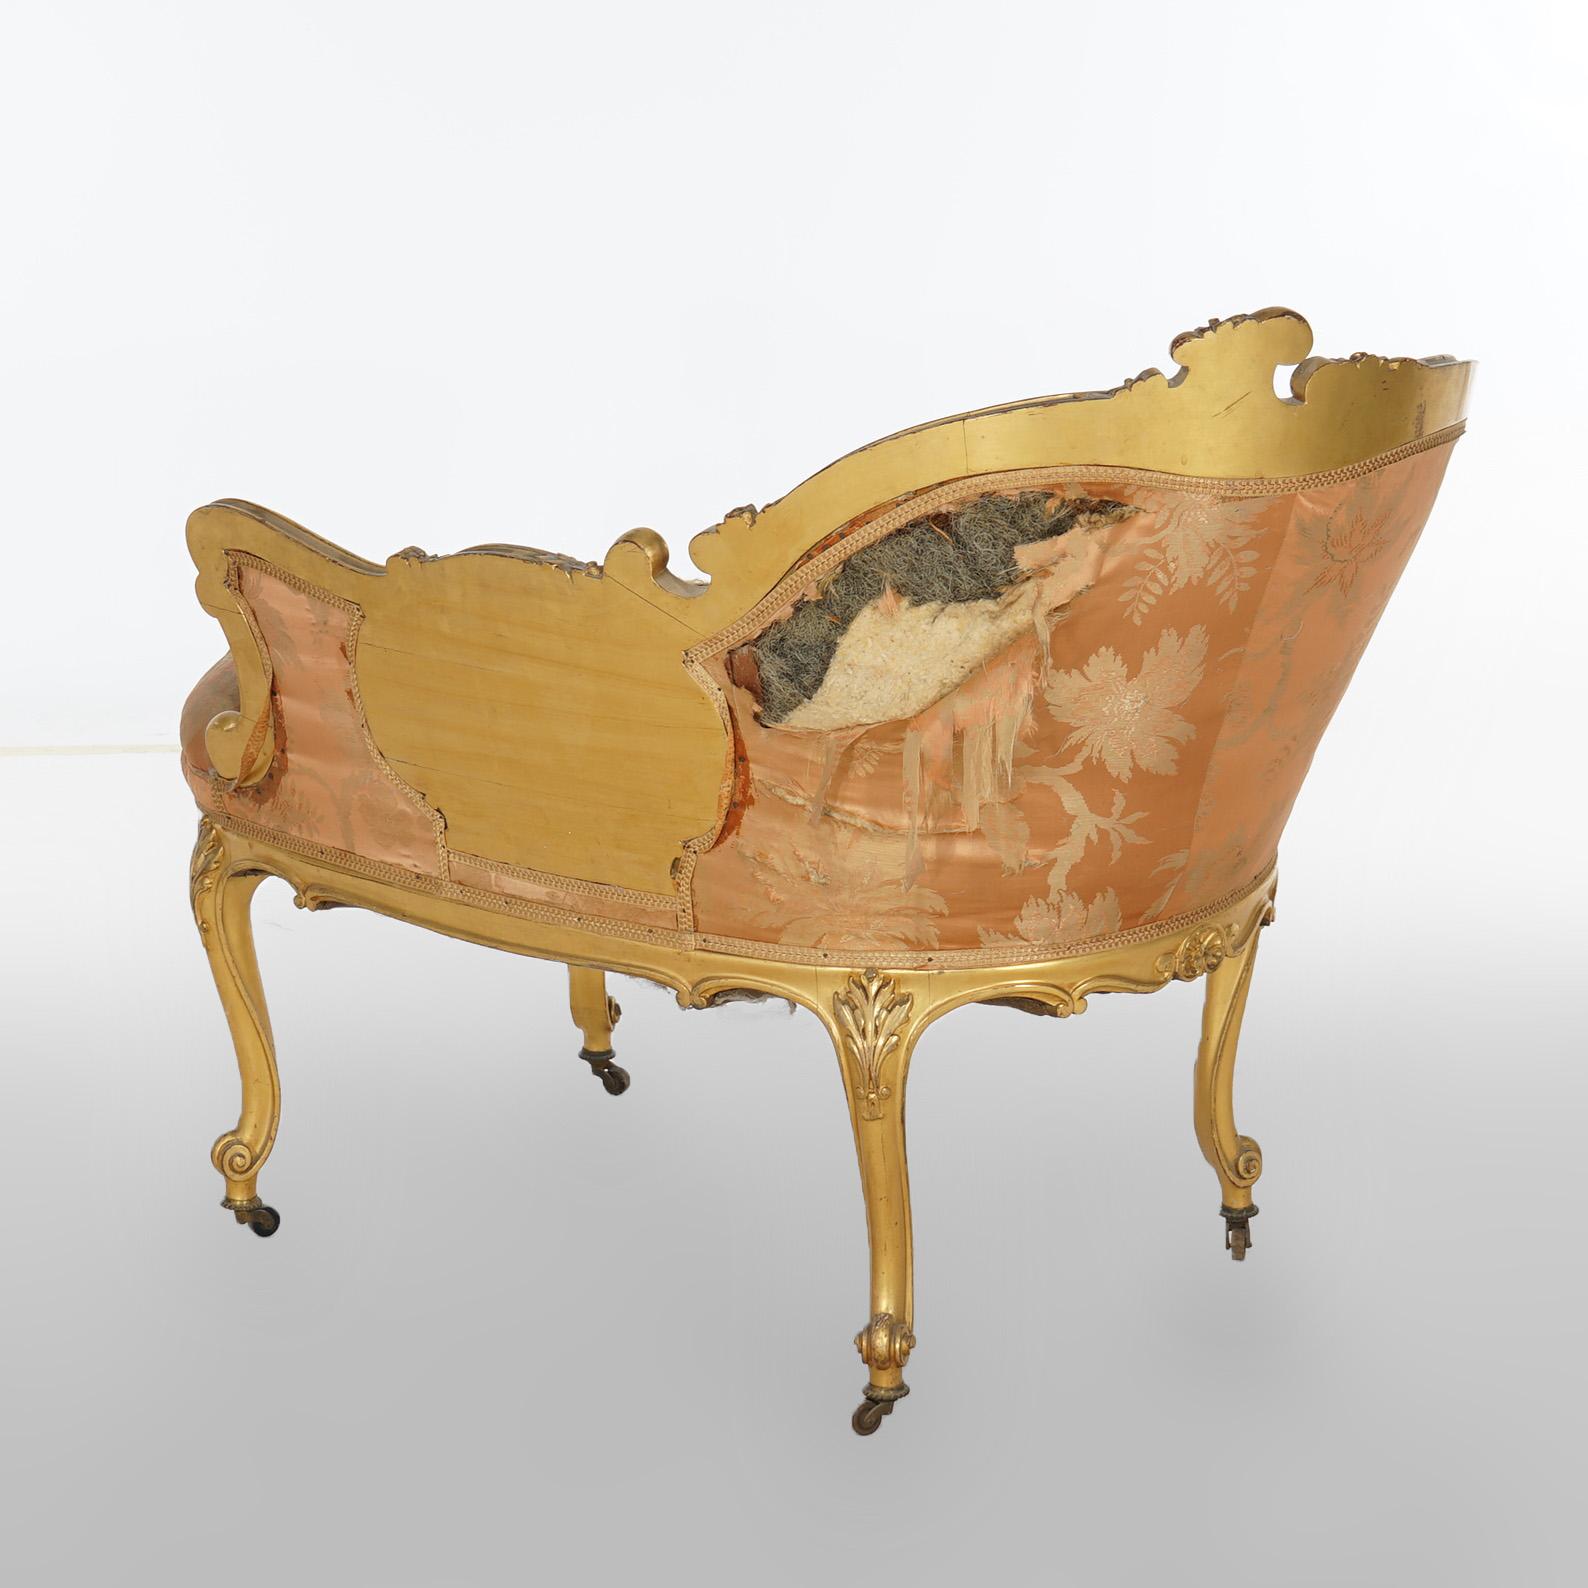 Early Antique French Rococo Vernis Martin & Giltwood Half-Recamier Settee 19th C For Sale 18